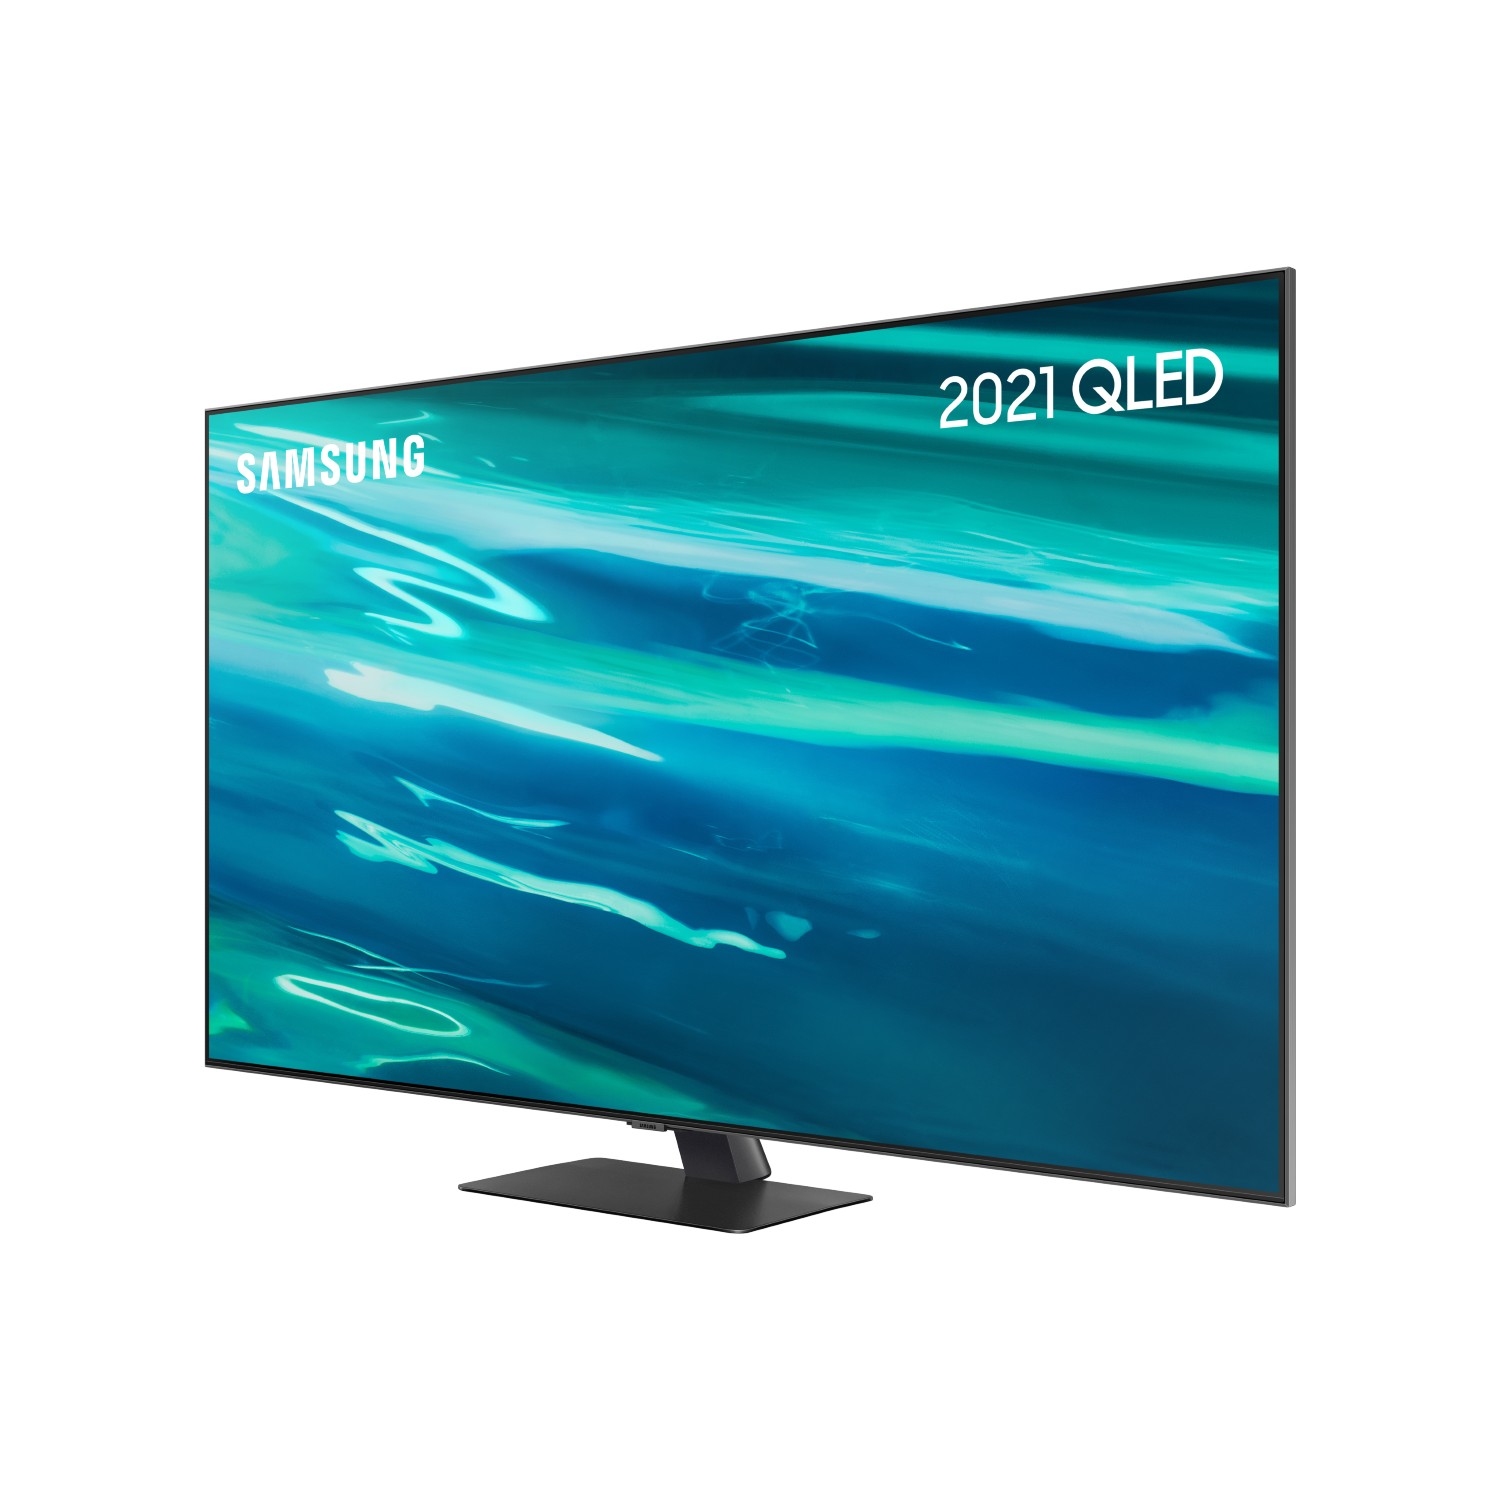 Samsung QE75Q80AATXXU 75" 4K QLED Smart TV Quantum HDR 1500 powered by HDR10+ with Object Tracking Sound and Direct Full Array - 7